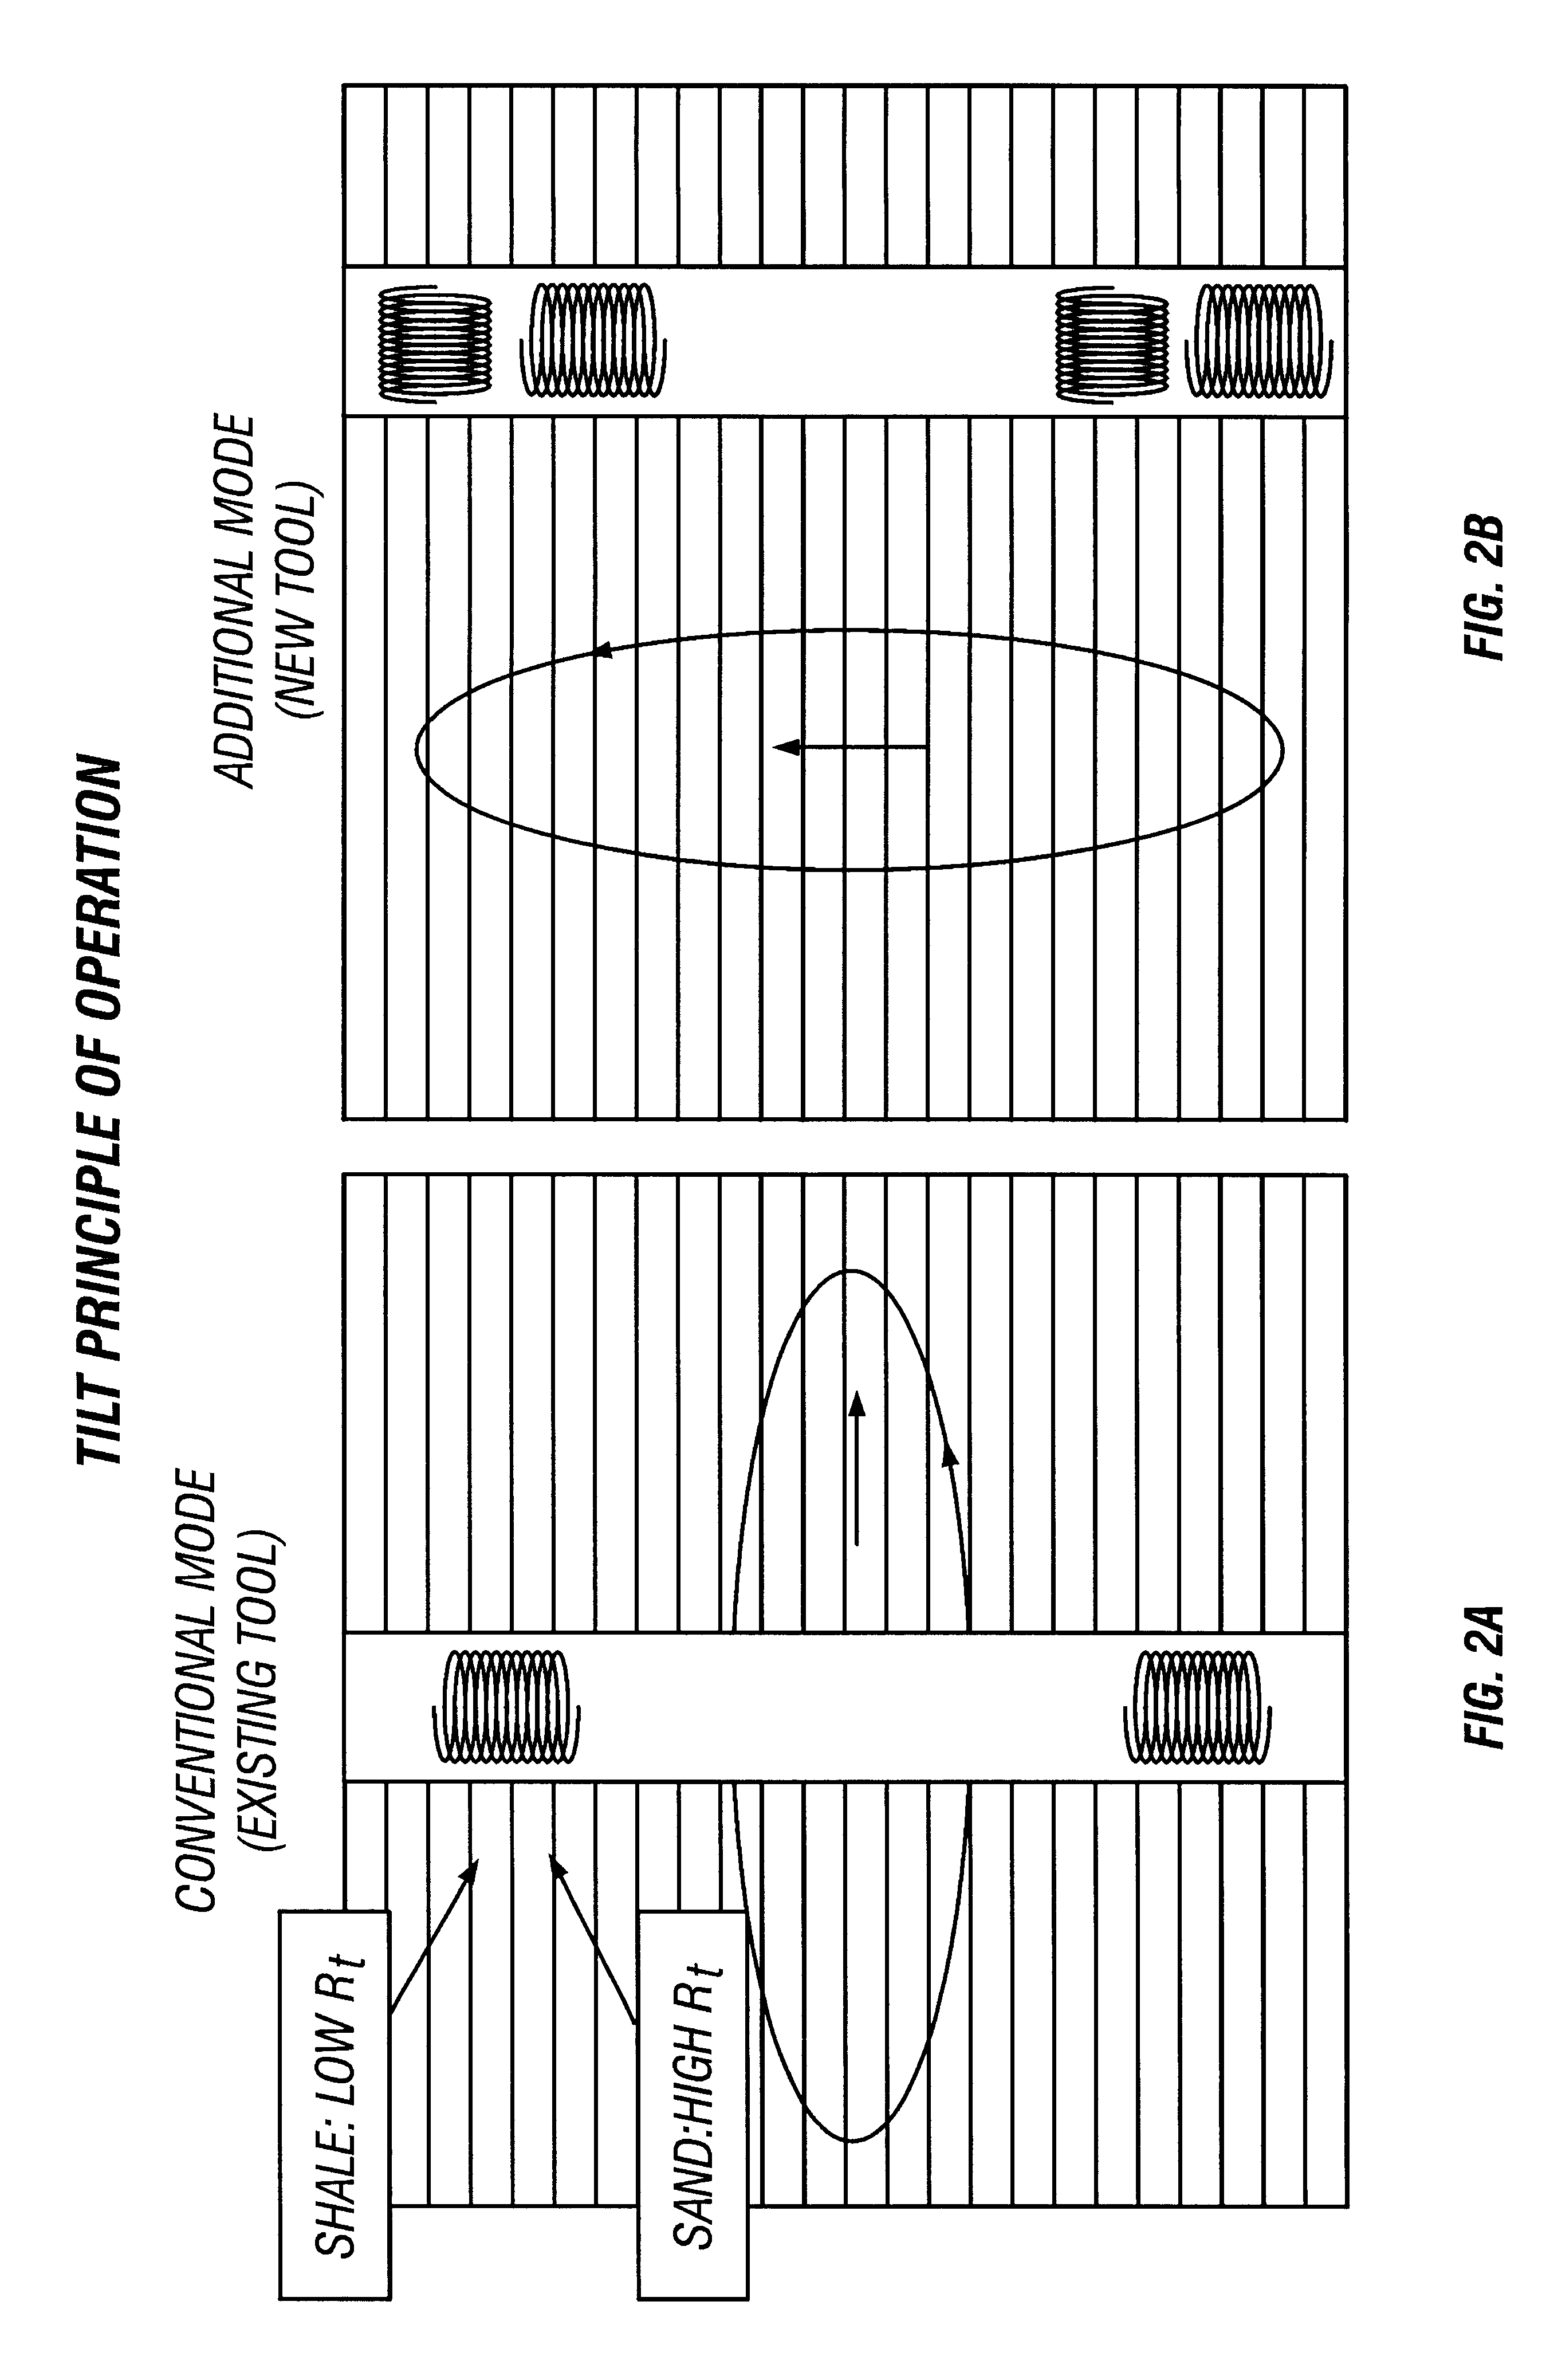 Method and apparatus for reducing the effects of parasitic and galvanic currents in a resistivity measuring tool